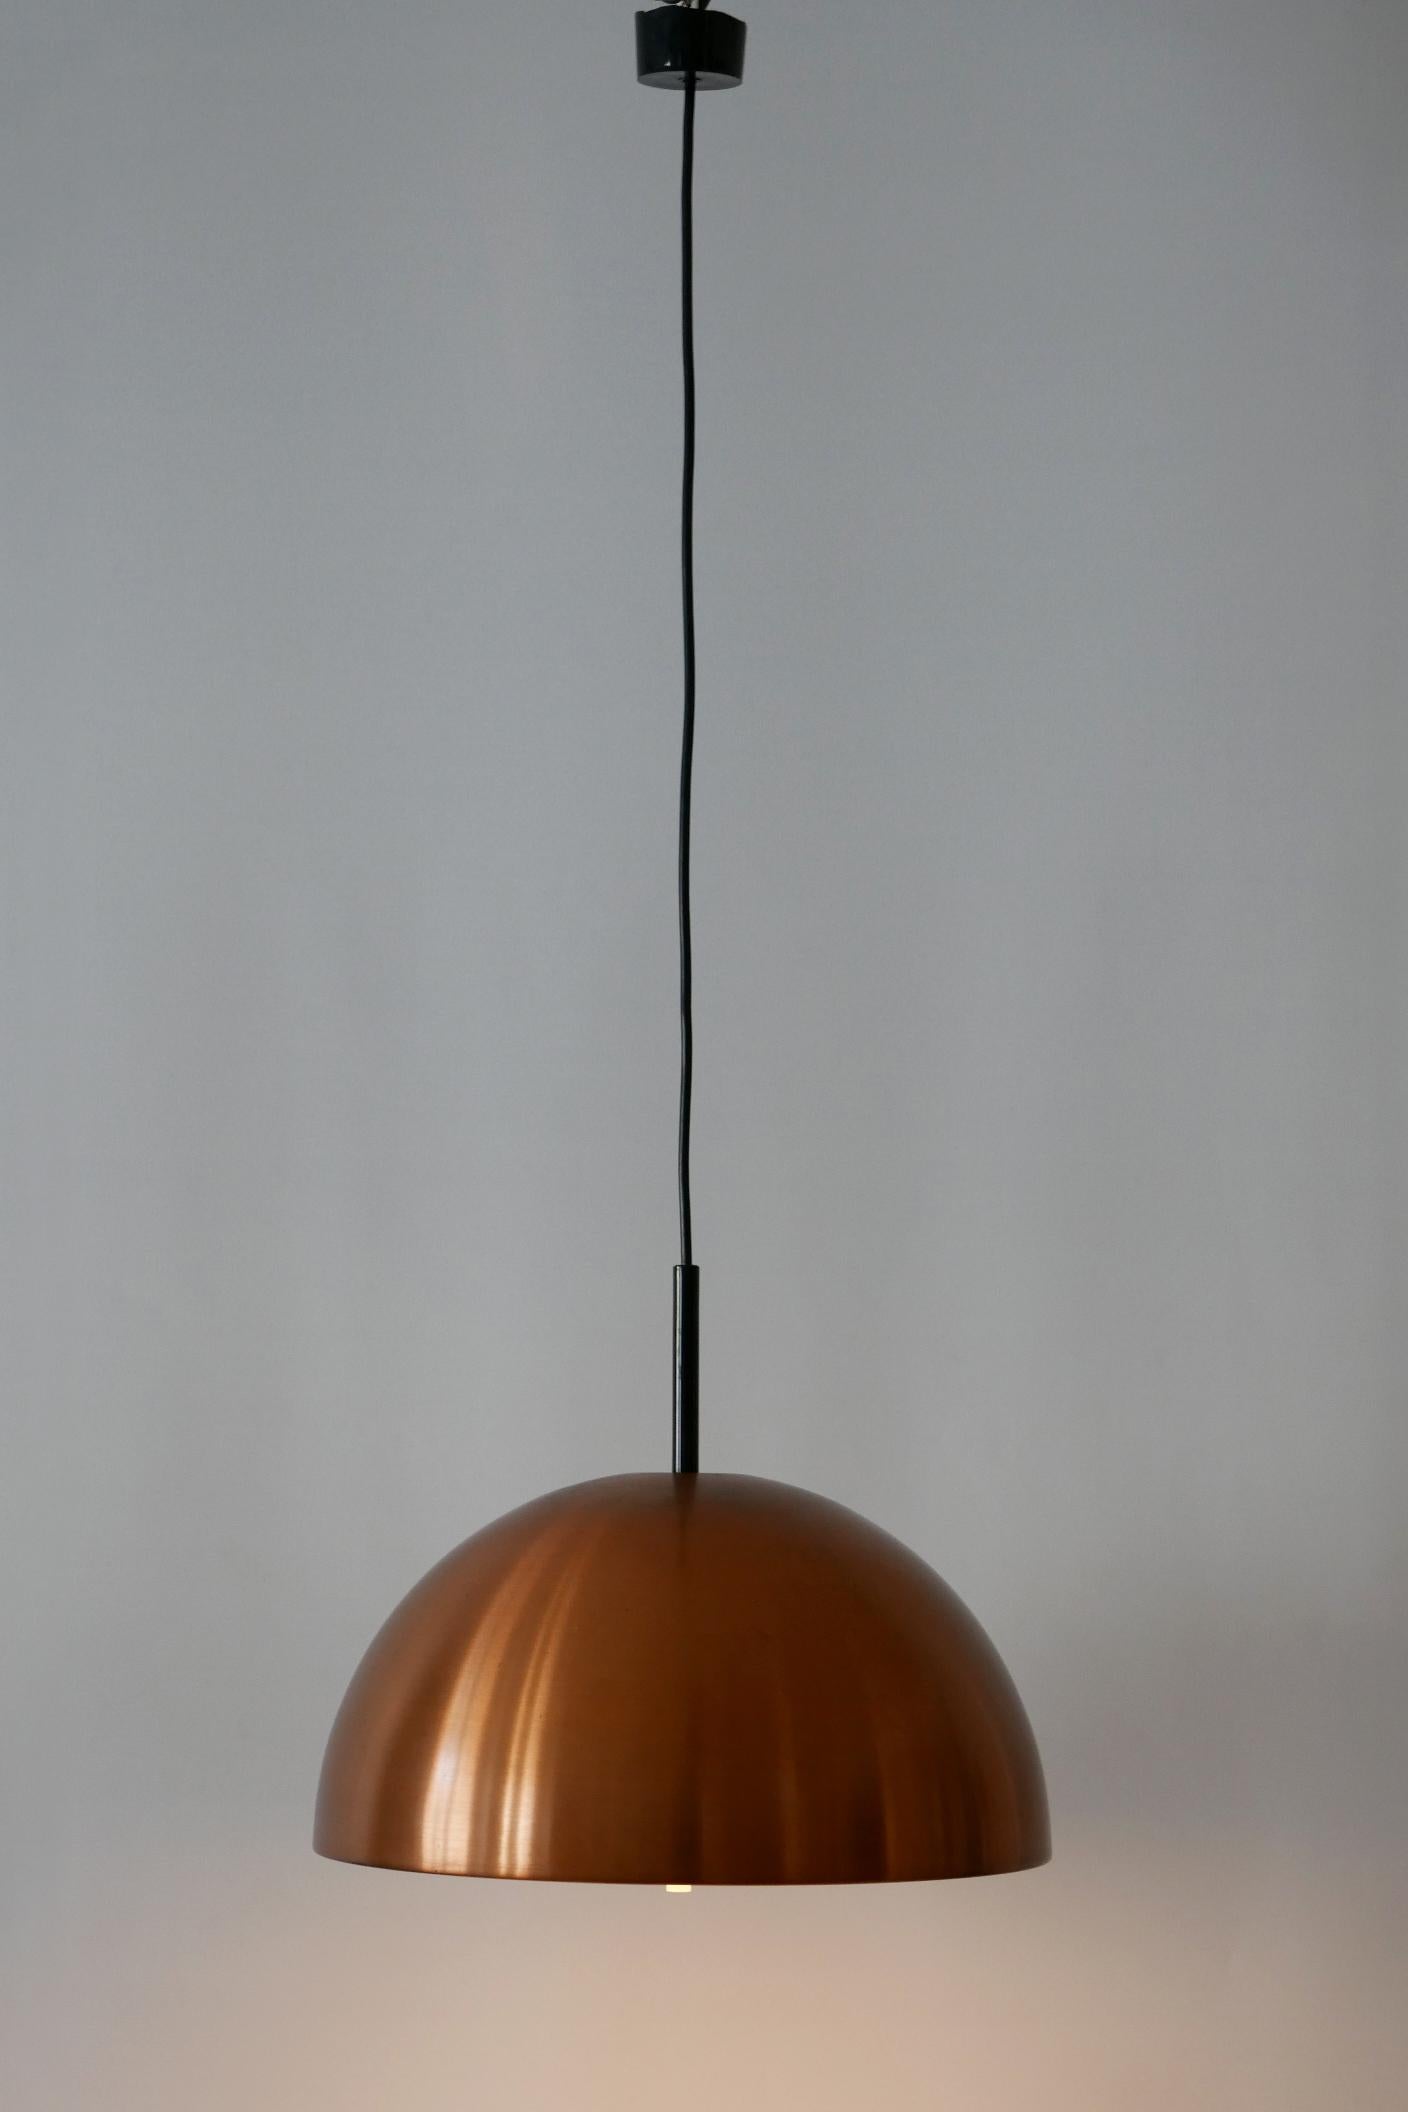 Mid-20th Century Elegant Mid-Century Modern Copper Pendant Lamp by Staff & Schwarz 1960s, Germany For Sale